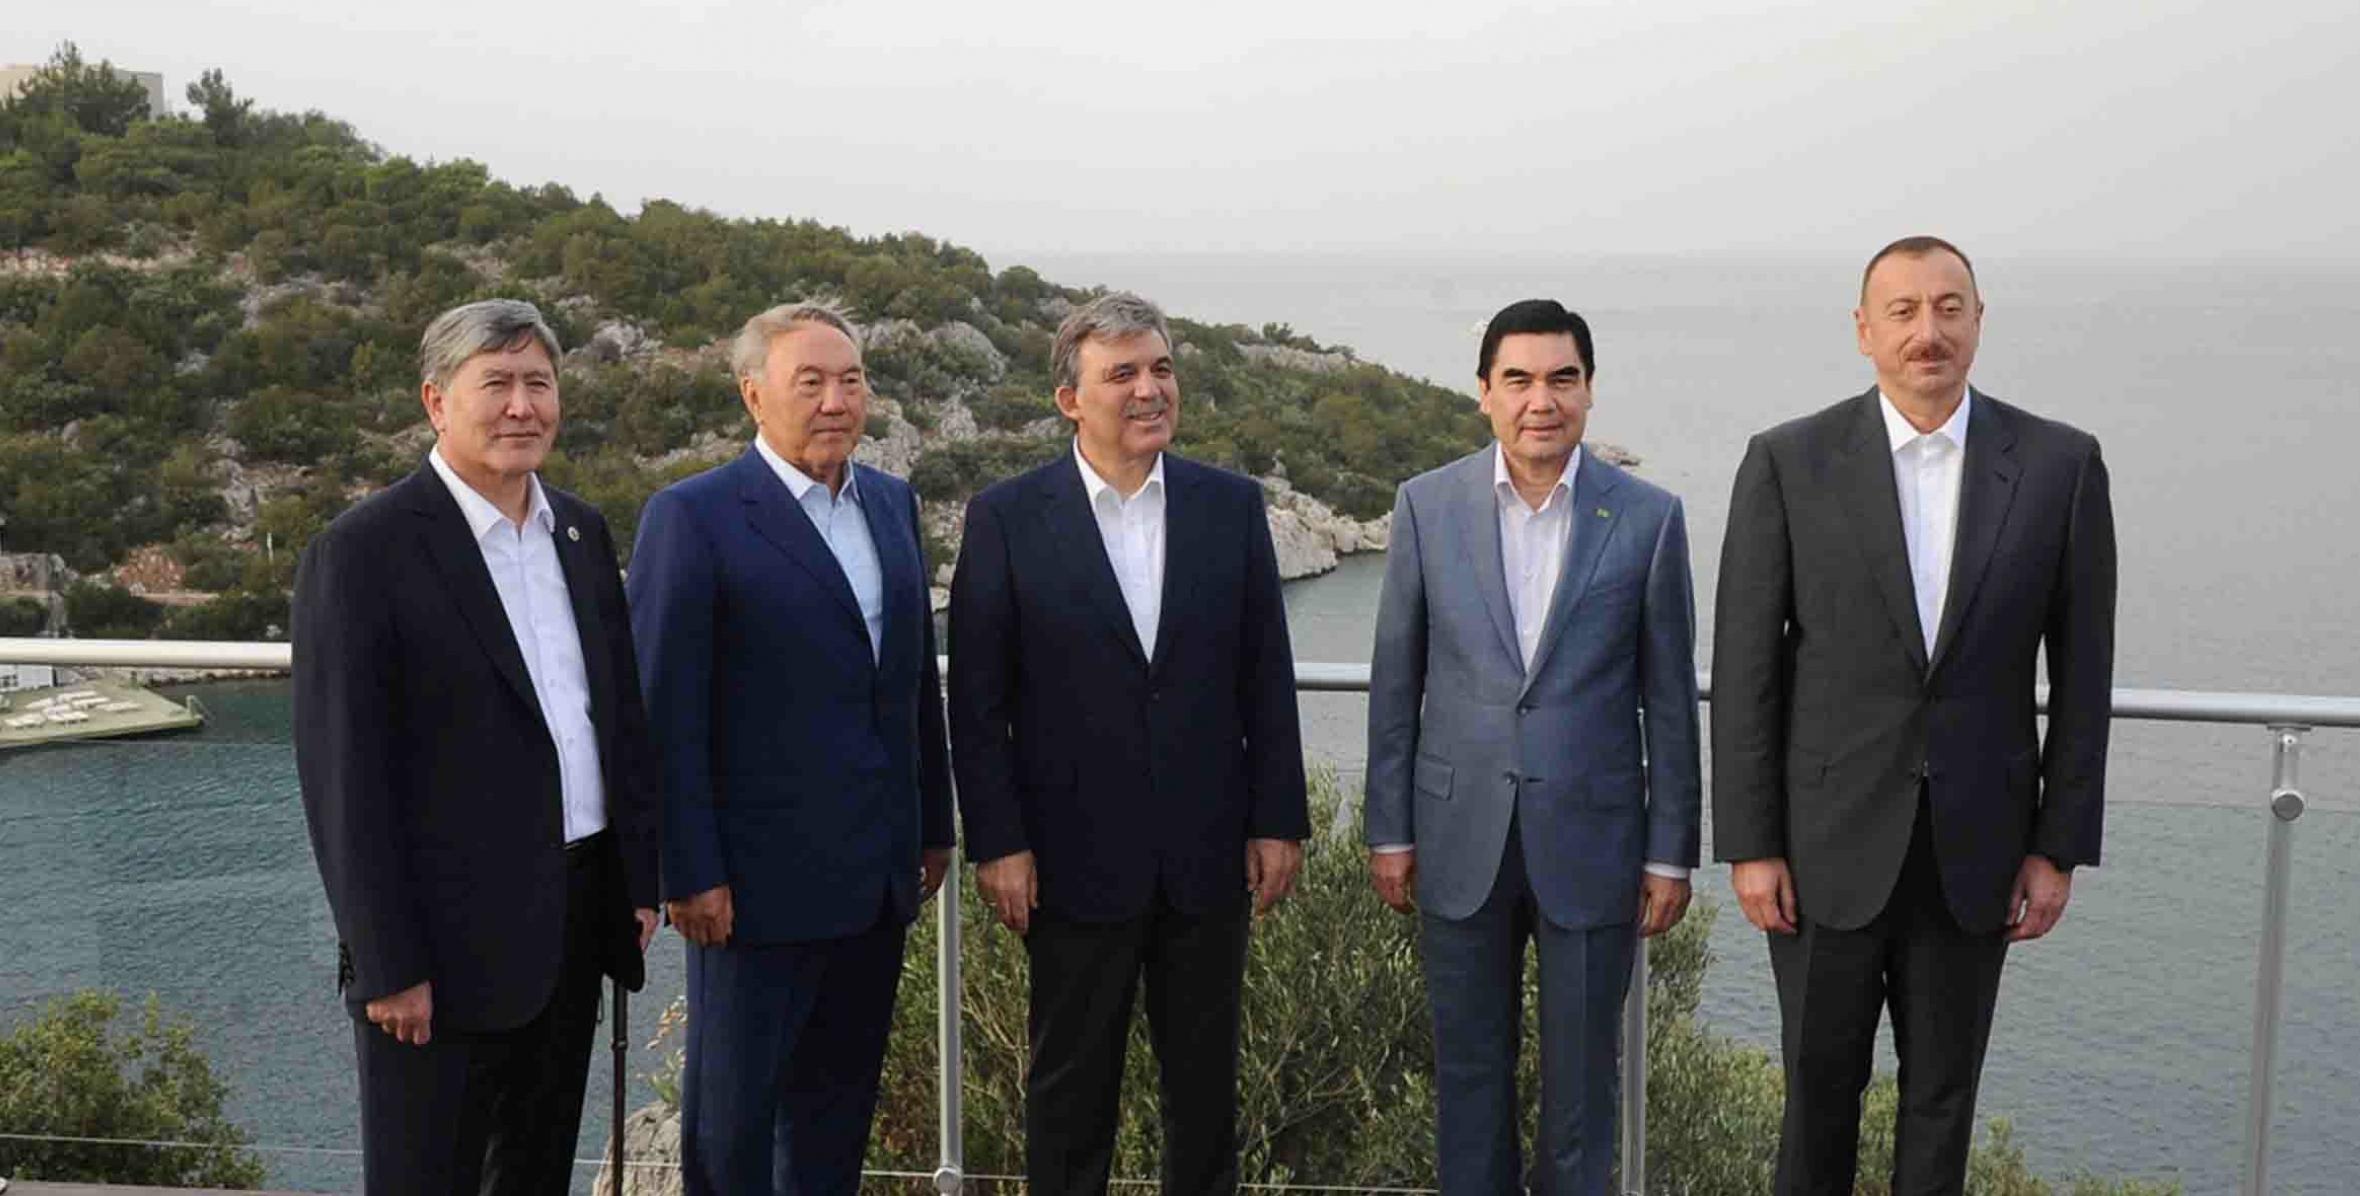 Official dinner reception was hosted in honor of the heads of state participating in the Fourth Summit of the Cooperation Council of Turkic-speaking States in Bodrum